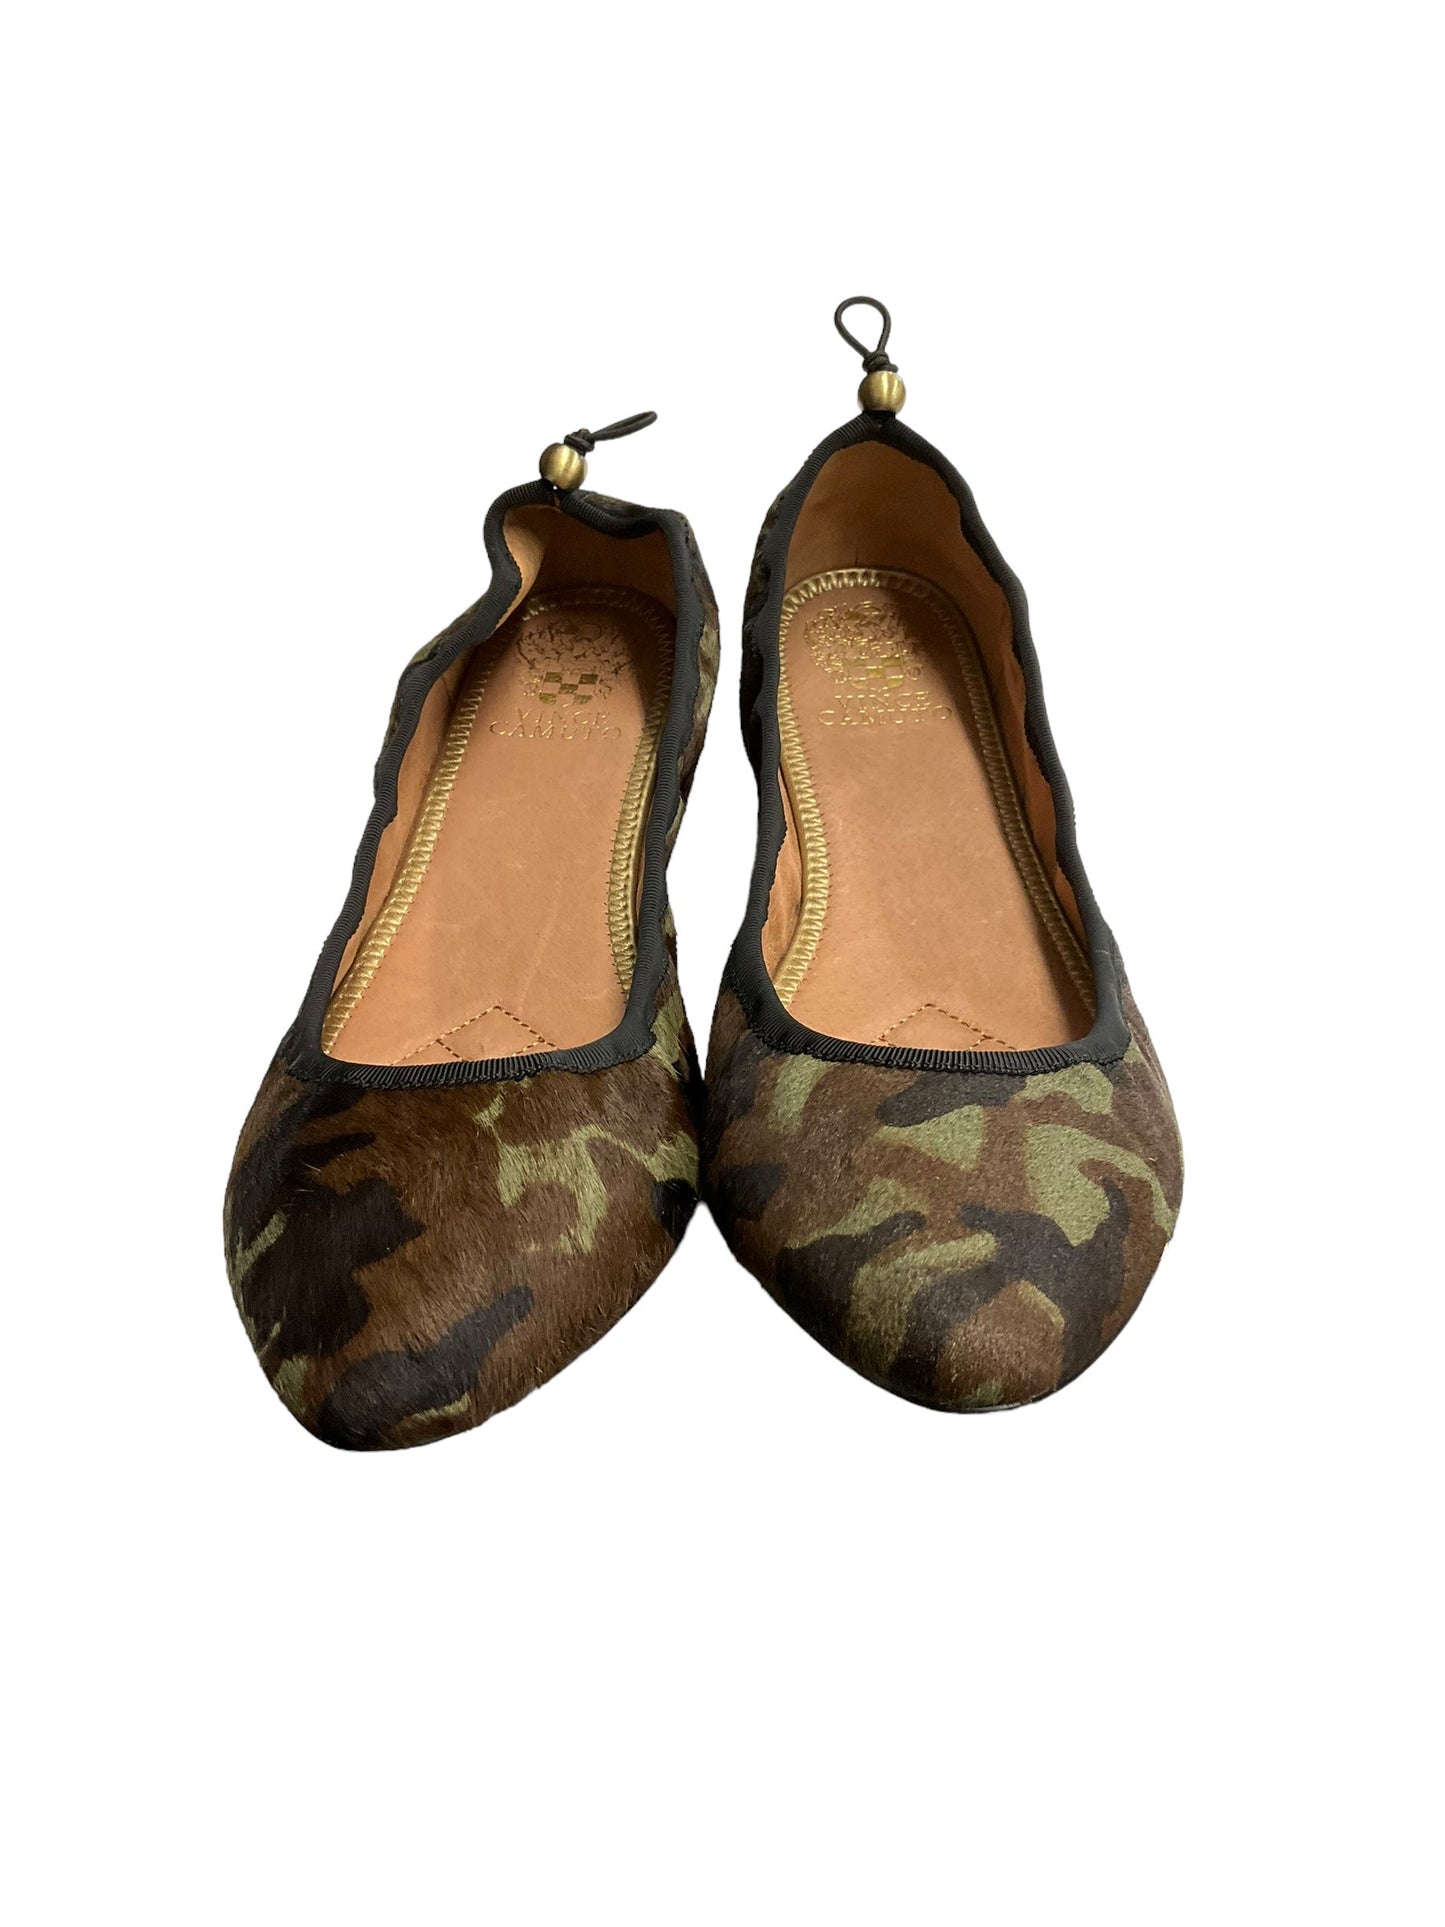 Camouflage Print Shoes Flats Vince Camuto, Size 9.5